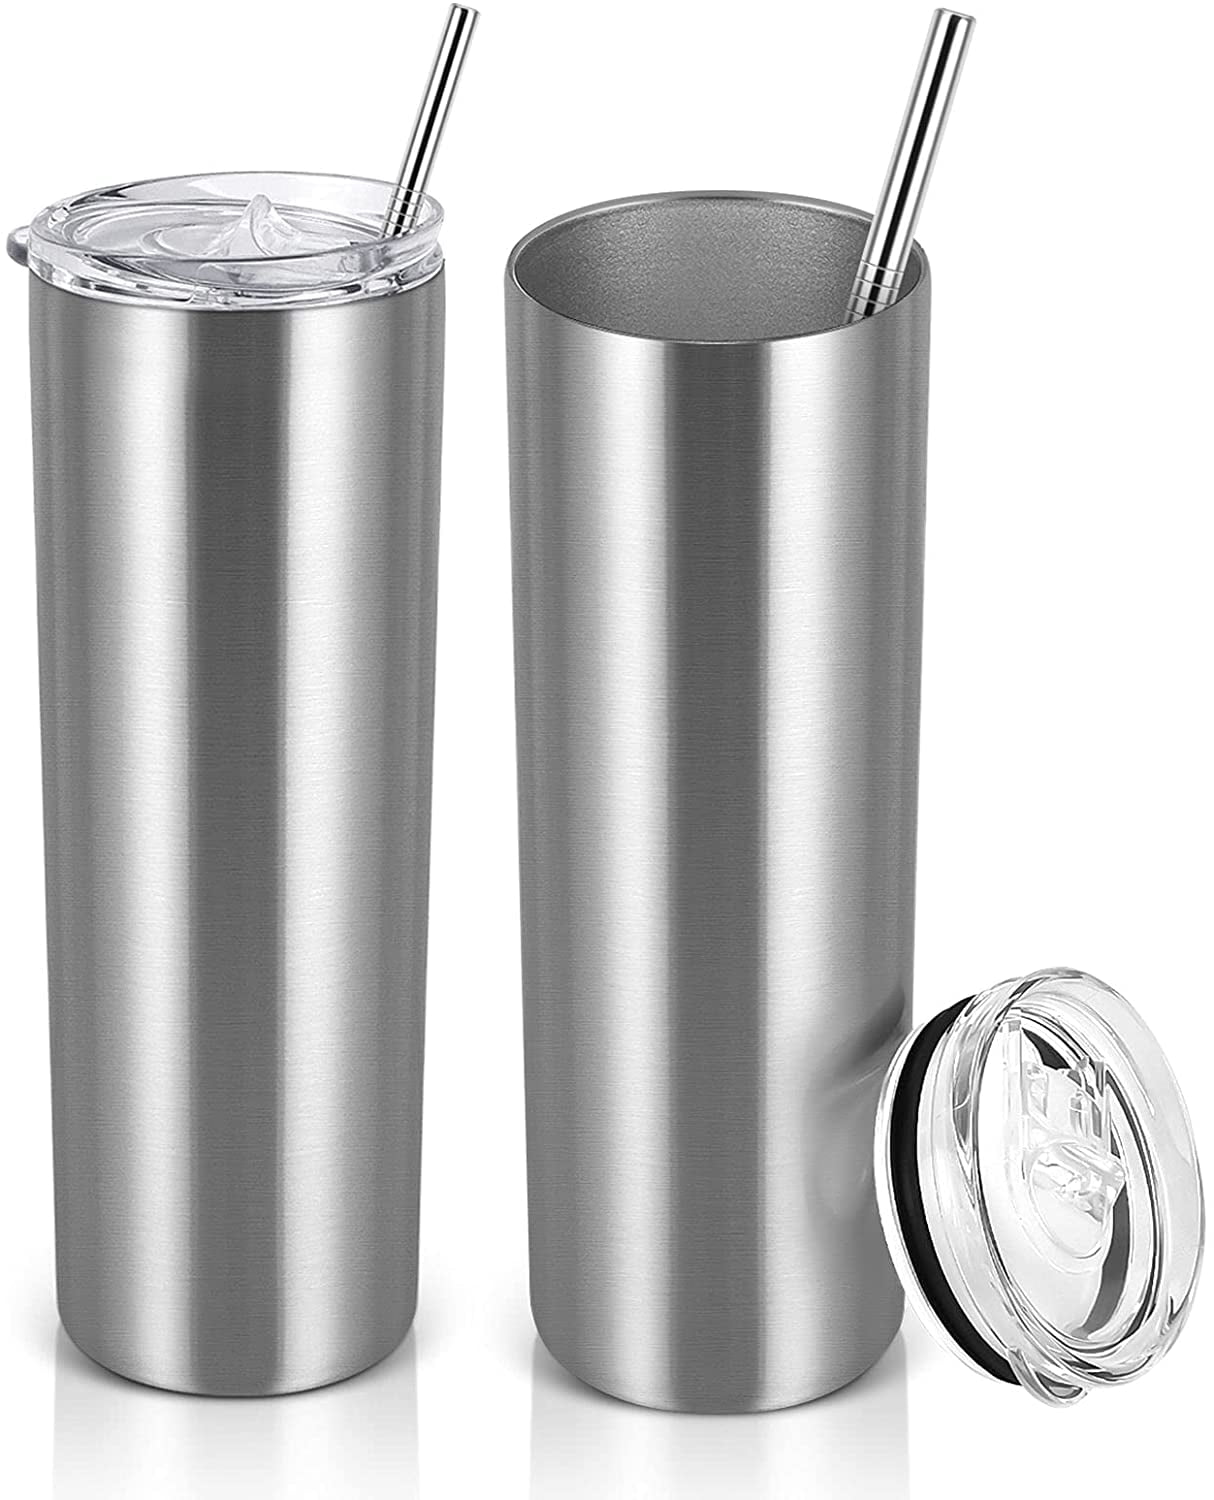 MakerFlo Crafts Tapered Tumbler, Stainless Steel, 32oz